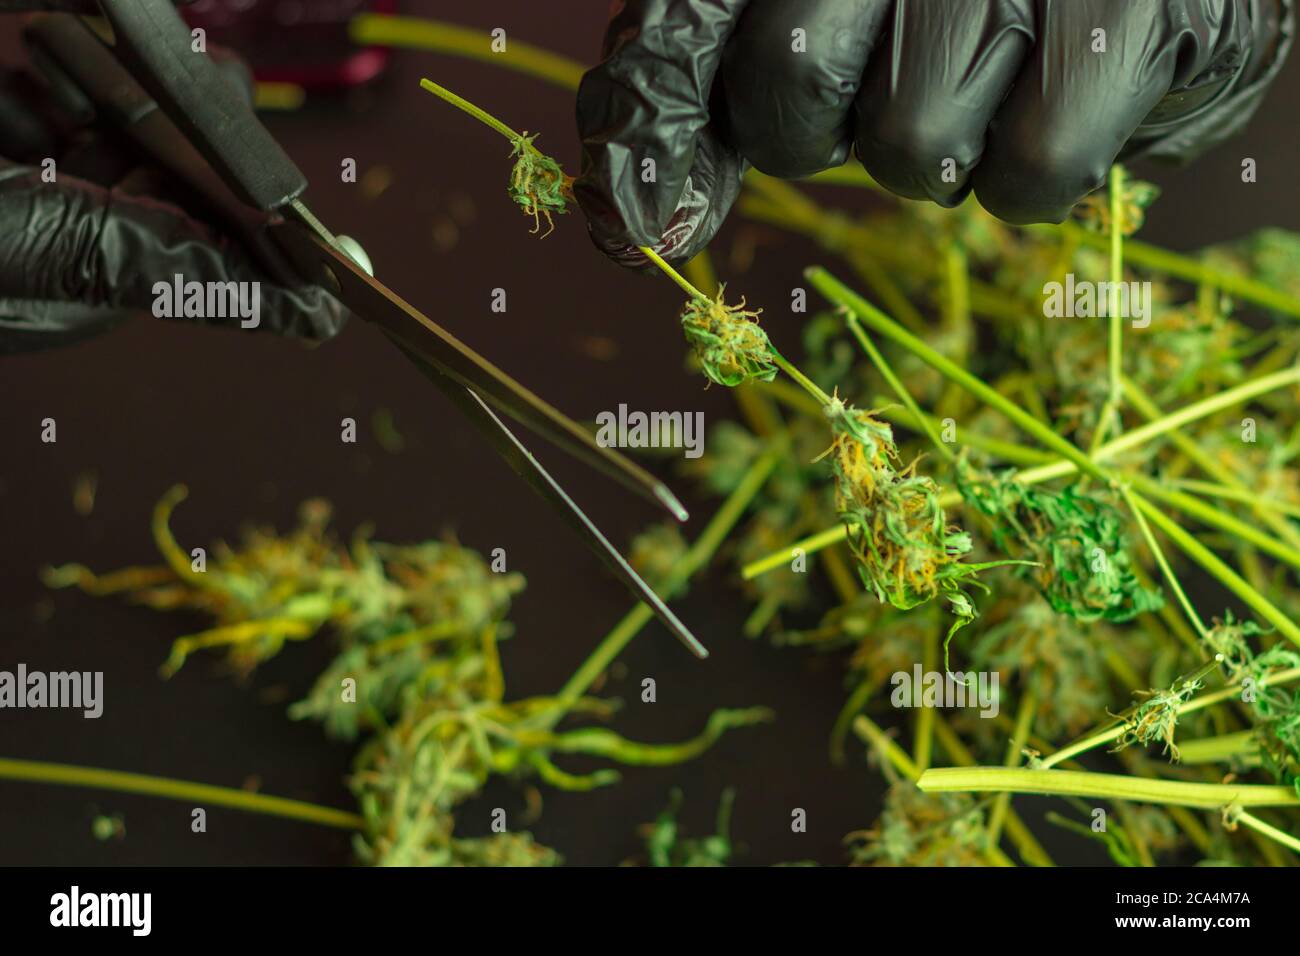 Cannabis industry business, commercial marijuana production. Weed plants trim, crop and prune. Man hand in gloves with scissors Stock Photo